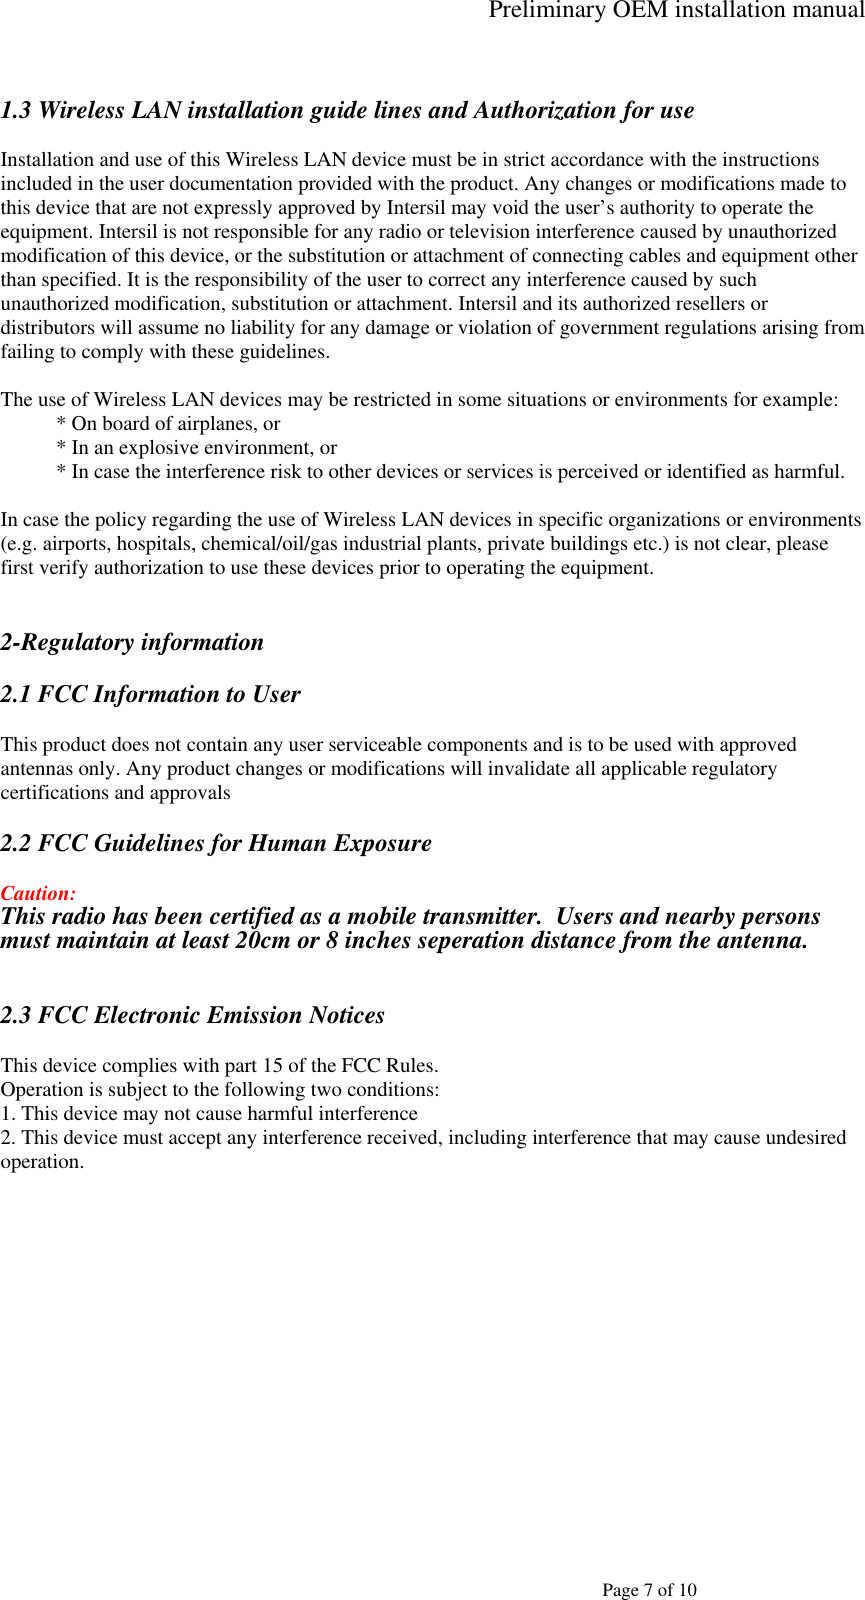 Preliminary OEM installation manual   Page 7 of 10  1.3 Wireless LAN installation guide lines and Authorization for use  Installation and use of this Wireless LAN device must be in strict accordance with the instructions included in the user documentation provided with the product. Any changes or modifications made to this device that are not expressly approved by Intersil may void the user’s authority to operate the equipment. Intersil is not responsible for any radio or television interference caused by unauthorized modification of this device, or the substitution or attachment of connecting cables and equipment other than specified. It is the responsibility of the user to correct any interference caused by such unauthorized modification, substitution or attachment. Intersil and its authorized resellers or distributors will assume no liability for any damage or violation of government regulations arising from failing to comply with these guidelines.  The use of Wireless LAN devices may be restricted in some situations or environments for example: * On board of airplanes, or * In an explosive environment, or * In case the interference risk to other devices or services is perceived or identified as harmful.  In case the policy regarding the use of Wireless LAN devices in specific organizations or environments (e.g. airports, hospitals, chemical/oil/gas industrial plants, private buildings etc.) is not clear, please first verify authorization to use these devices prior to operating the equipment.   2-Regulatory information  2.1 FCC Information to User  This product does not contain any user serviceable components and is to be used with approved antennas only. Any product changes or modifications will invalidate all applicable regulatory certifications and approvals  2.2 FCC Guidelines for Human Exposure  Caution: This radio has been certified as a mobile transmitter.  Users and nearby persons must maintain at least 20cm or 8 inches seperation distance from the antenna. 2.3 FCC Electronic Emission Notices  This device complies with part 15 of the FCC Rules. Operation is subject to the following two conditions: 1. This device may not cause harmful interference 2. This device must accept any interference received, including interference that may cause undesired operation.  